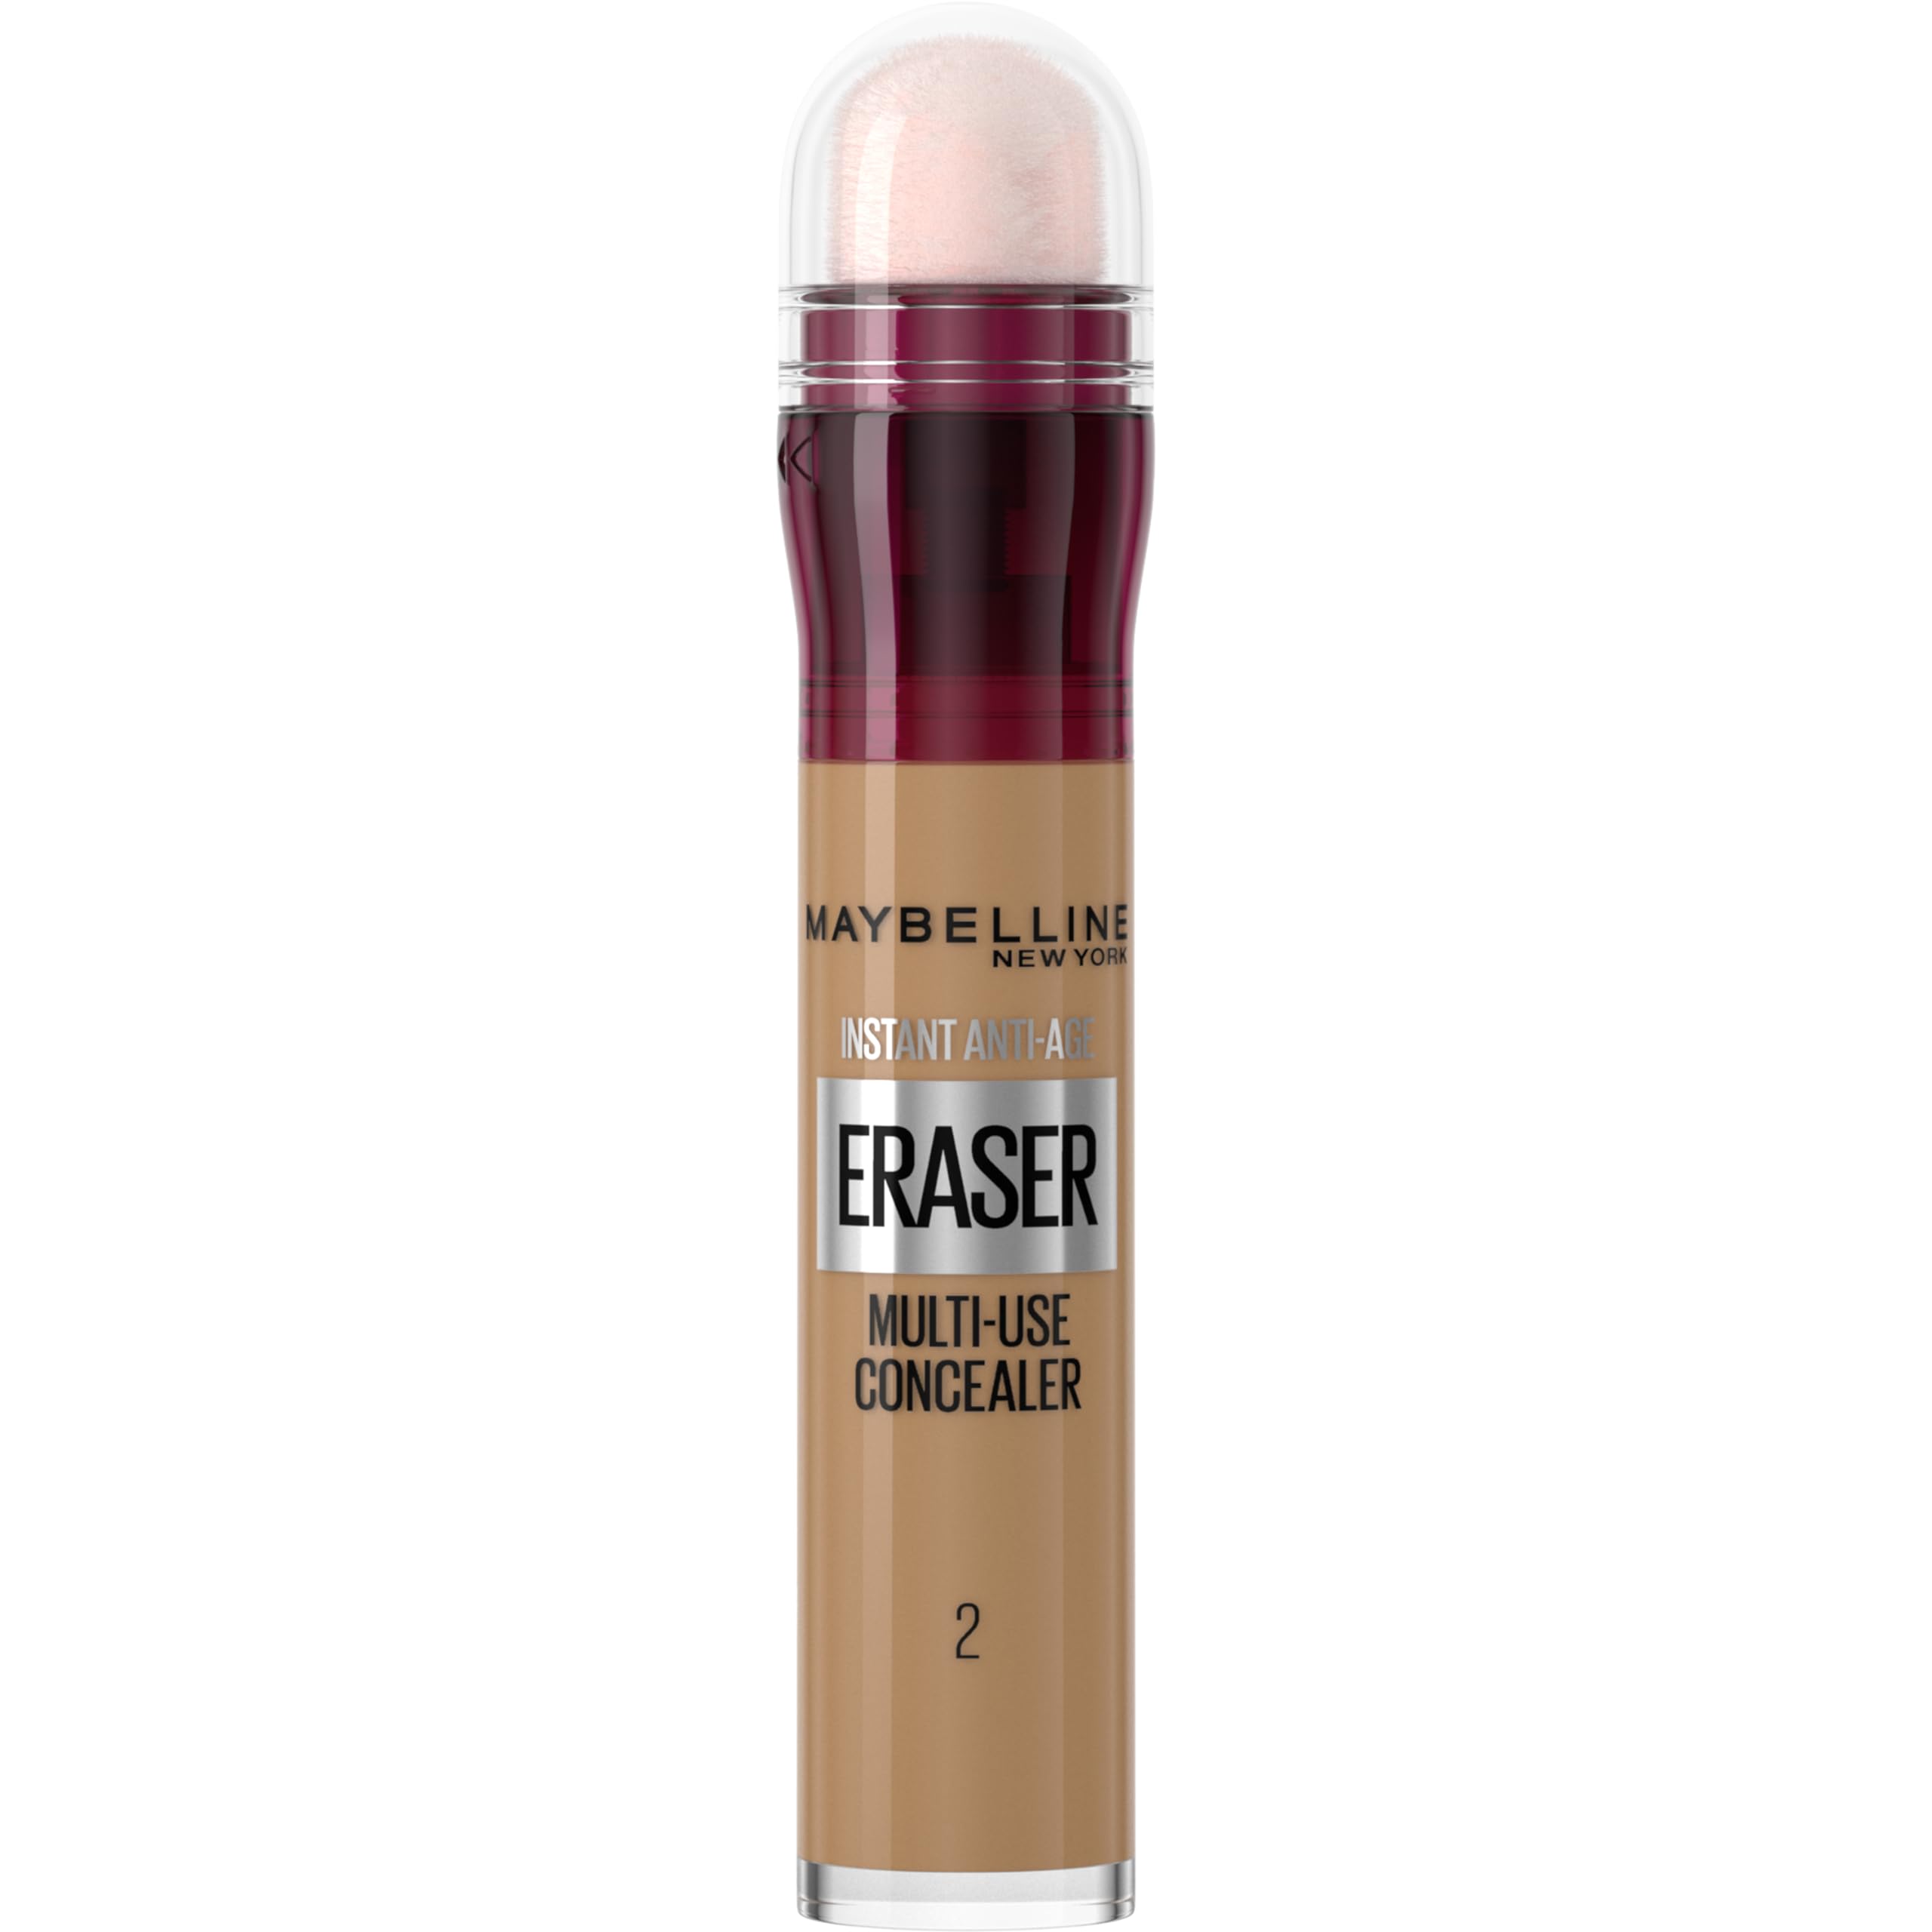 Maybelline Instant Age Rewind Eraser Dark Circles Treatment Multi-Use Concealer, 130, 1 Count (Packaging May Vary) & Fit Me Matte + Poreless Liquid Oil-Free Foundation Makeup, Classic Ivory, 1 Count